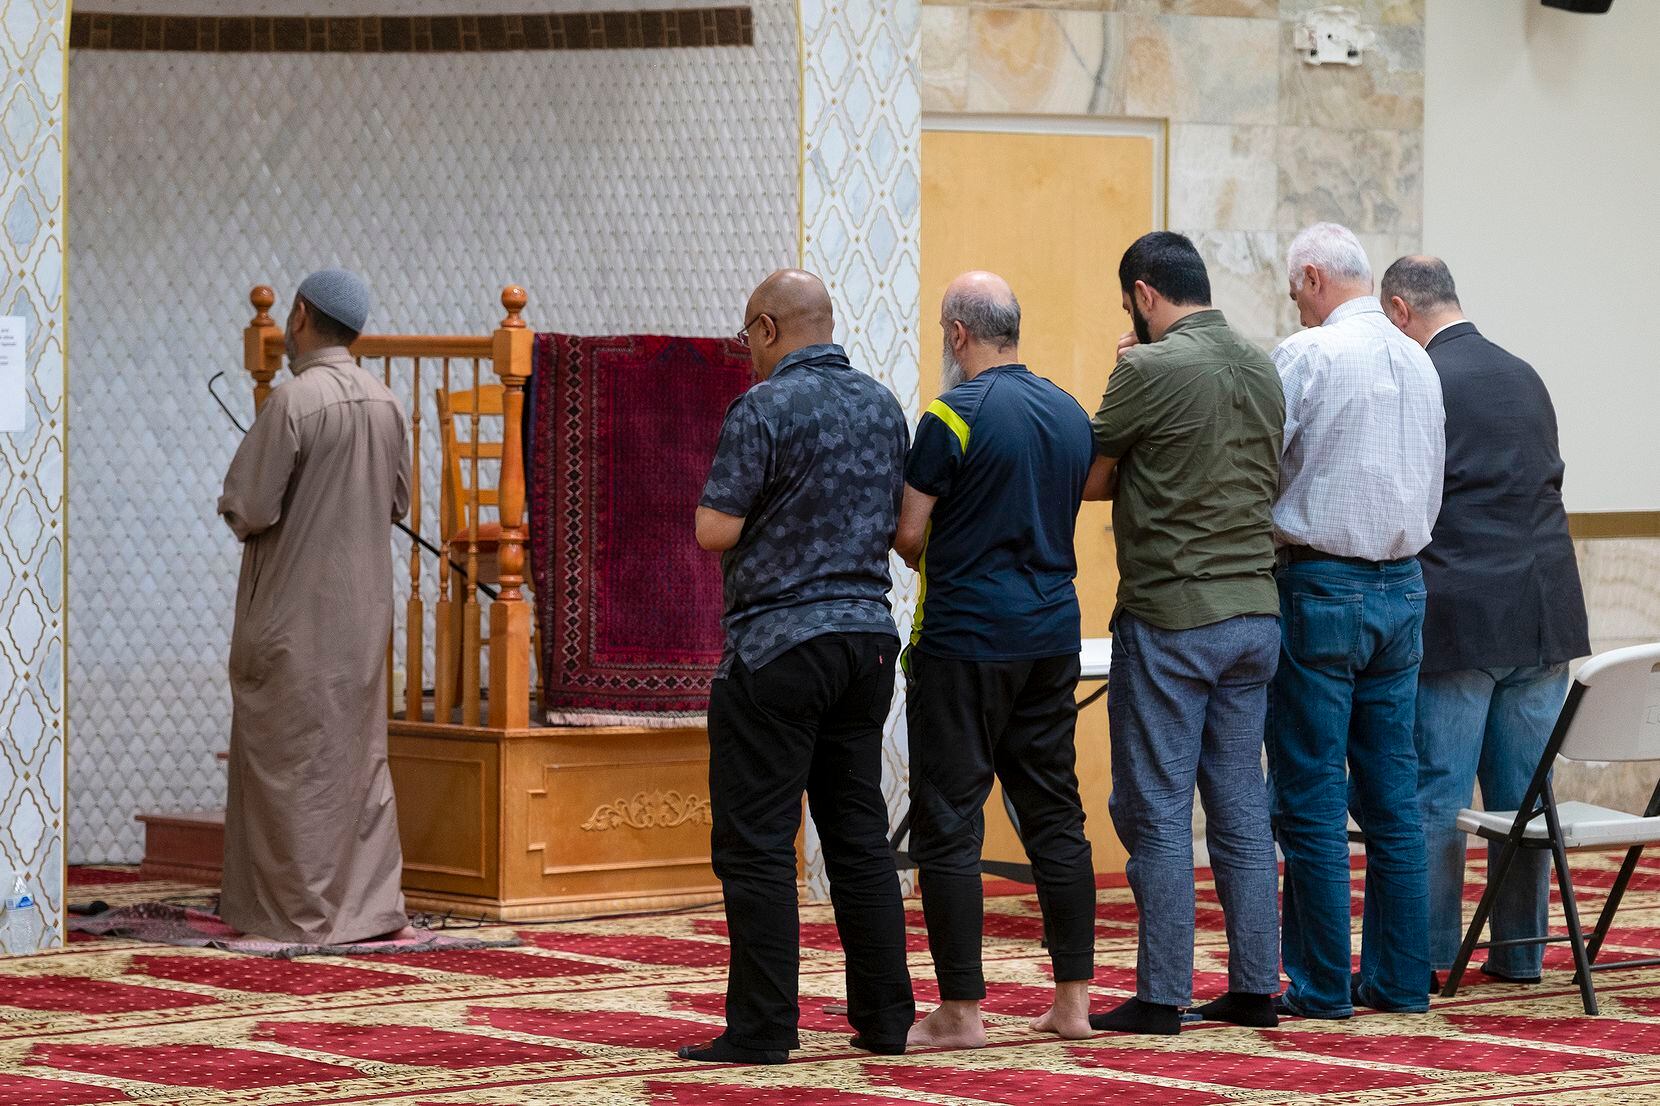 An Imam leads a group of men during the Dhuhr afternoon prayer at the Islamic Center of New...